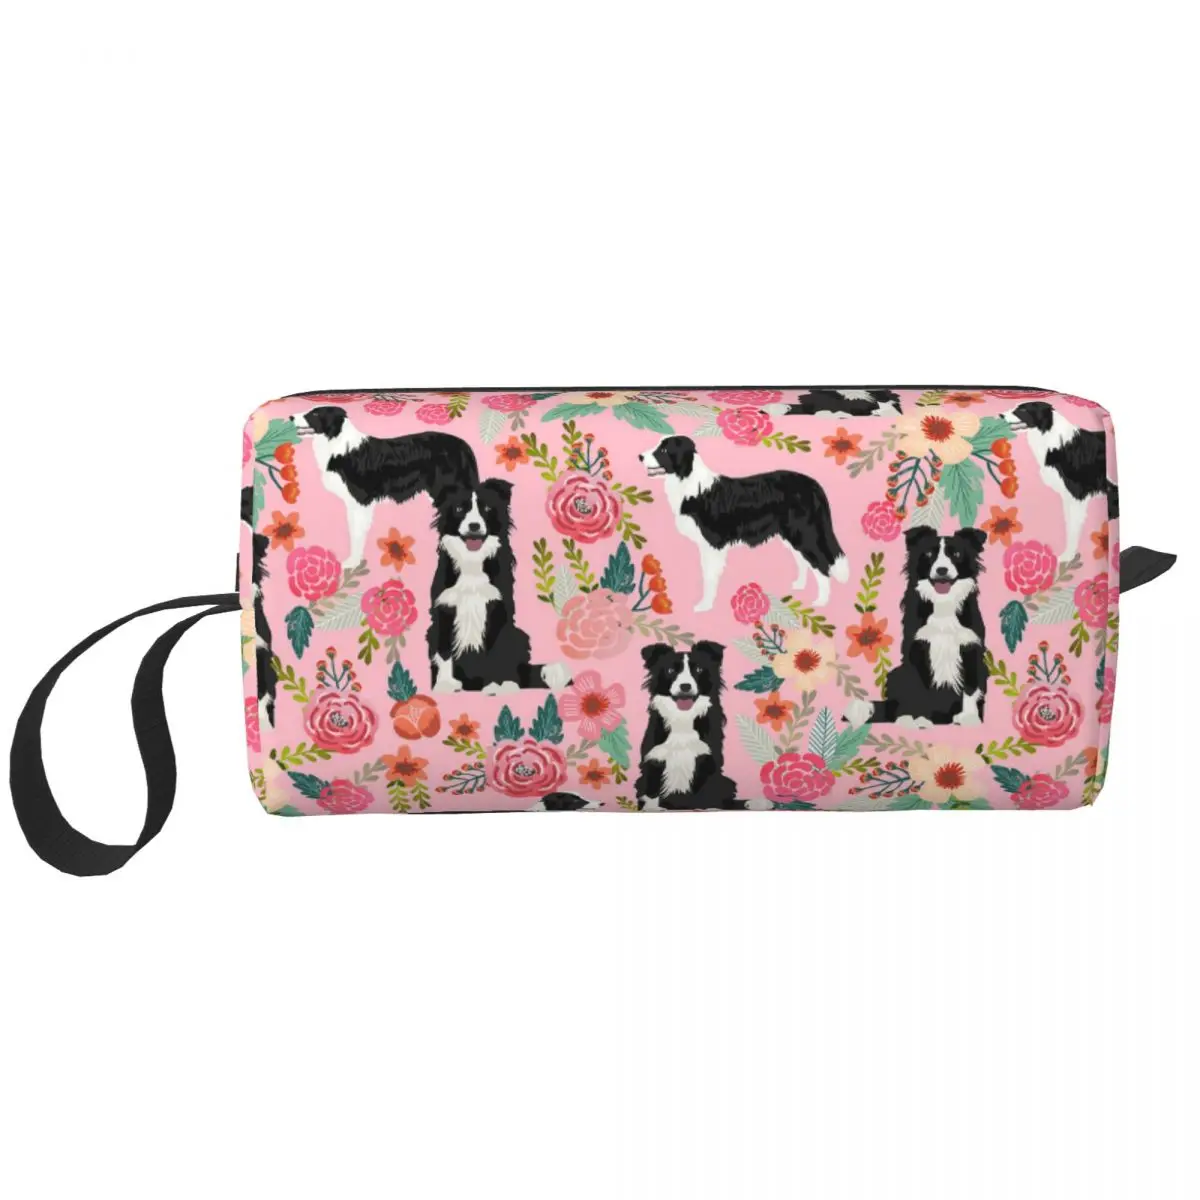 

Border Collie Pink Floral Dog Makeup Bag Pouch Animal Cosmetic Bag Travel Toiletry Bag Organizer Storage Purse Large Capacity